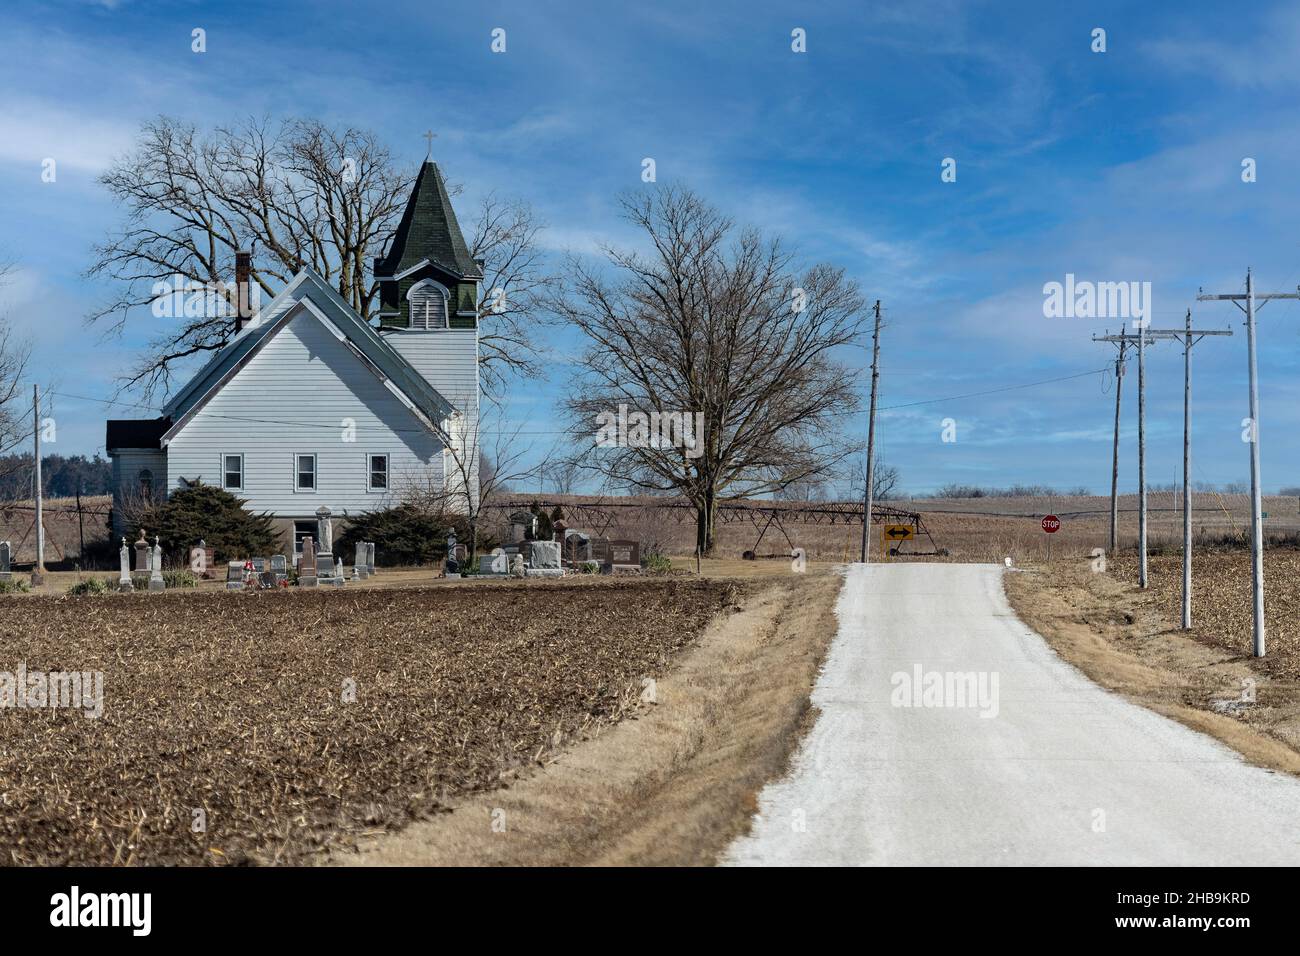 Abandoned country church in rural Illinois. Stock Photo